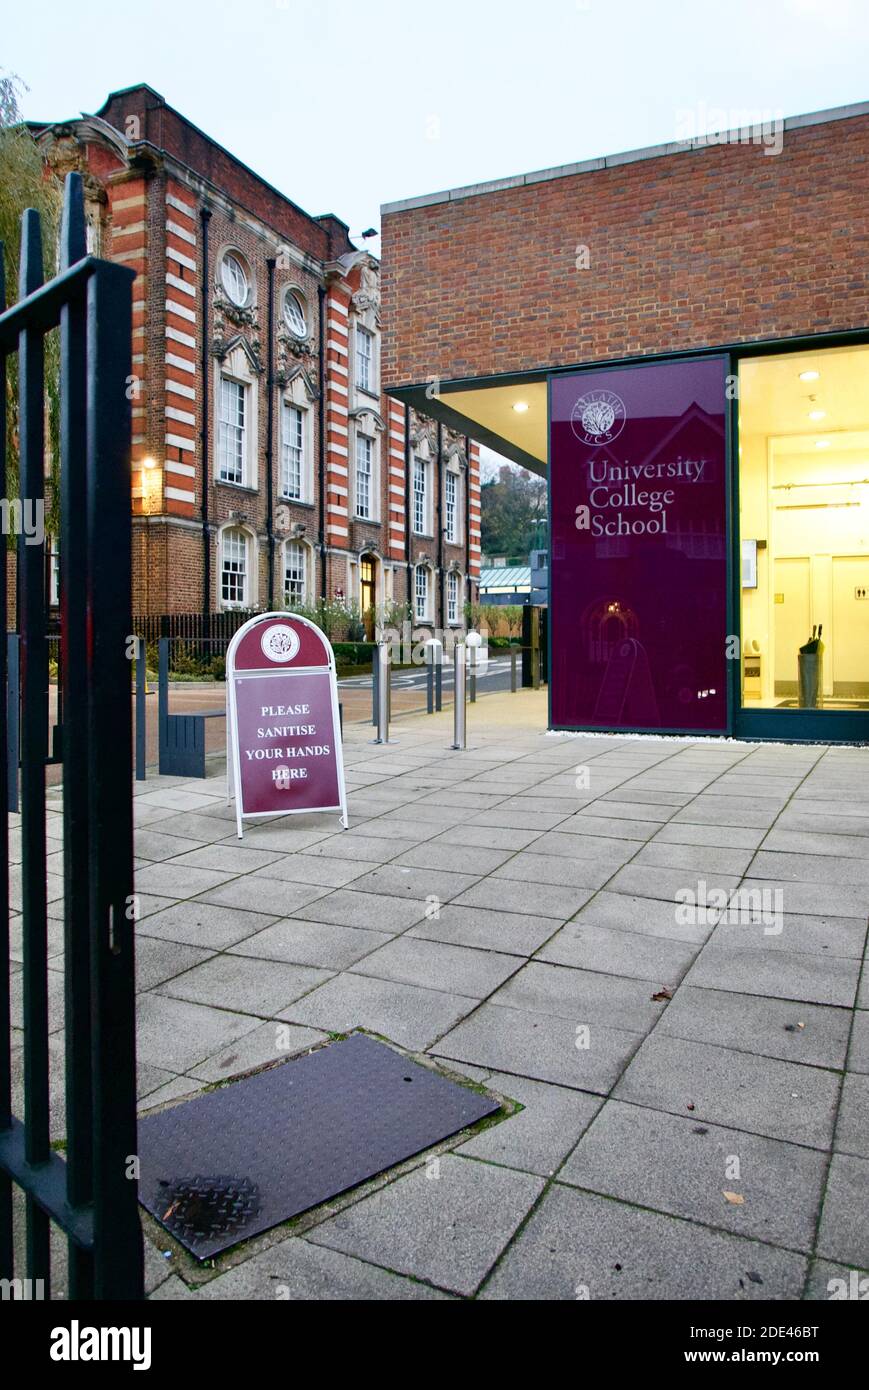 Entrance of secondary school in Hampstead displaying hand washing reminder sign promoting covid19 public health guidance. University College School Stock Photo